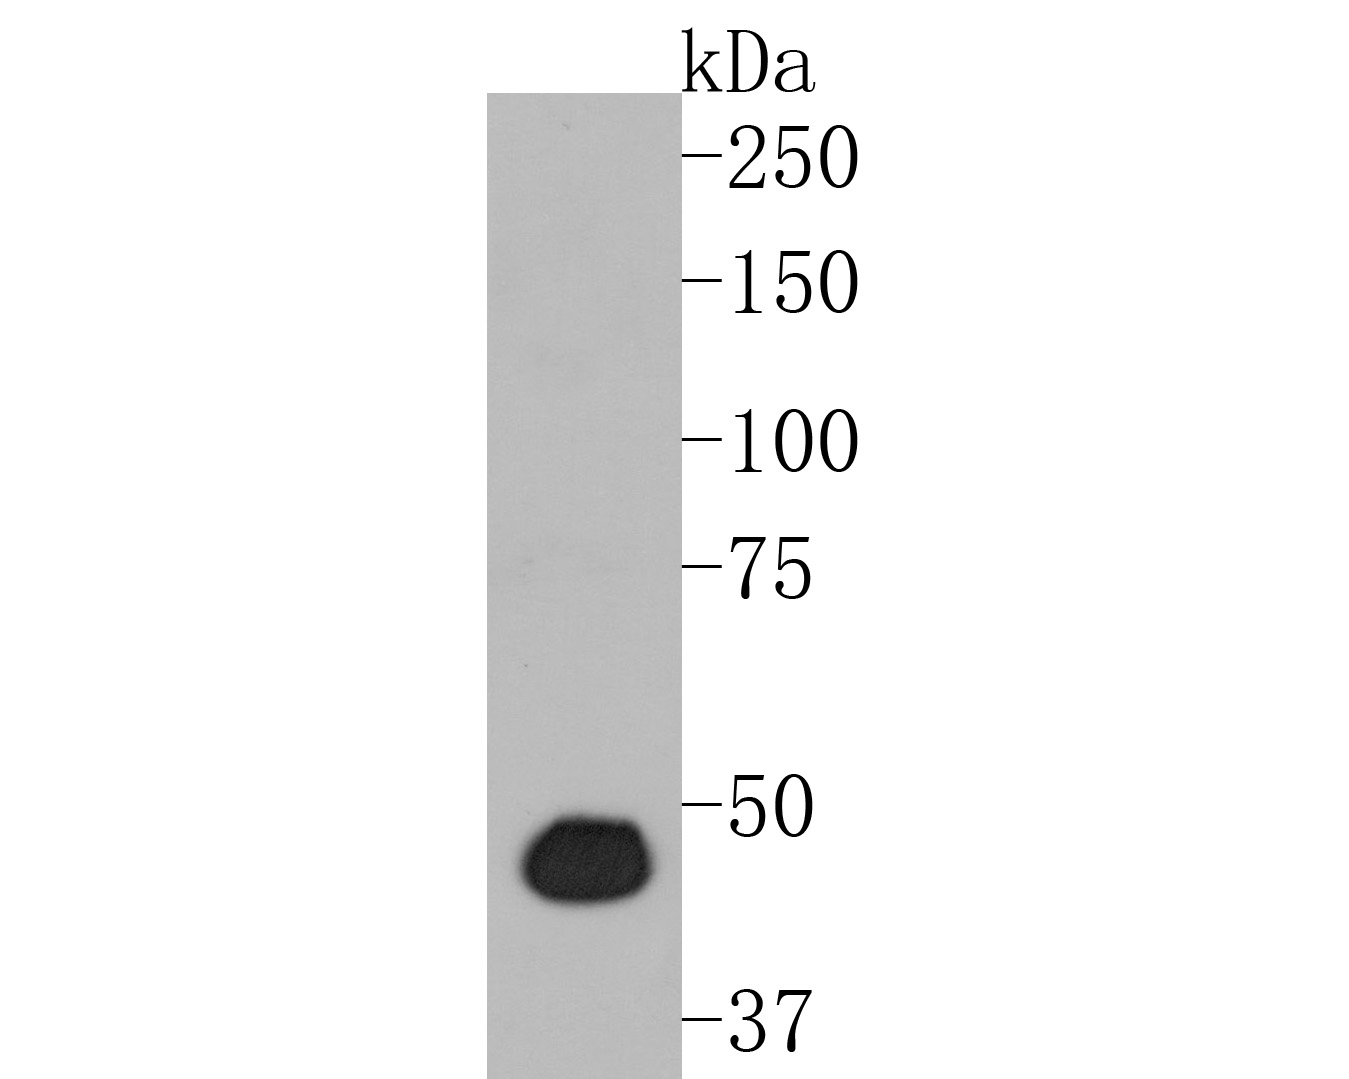 Western blot analysis of PGD on zebrafish tissue lysates. Proteins were transferred to a PVDF membrane and blocked with 5% BSA in PBS for 1 hour at room temperature. The primary antibody (ET7111-12, 1/500) was used in 5% BSA at room temperature for 2 hours. Goat Anti-Rabbit IgG - HRP Secondary Antibody (HA1001) at 1:5,000 dilution was used for 1 hour at room temperature.